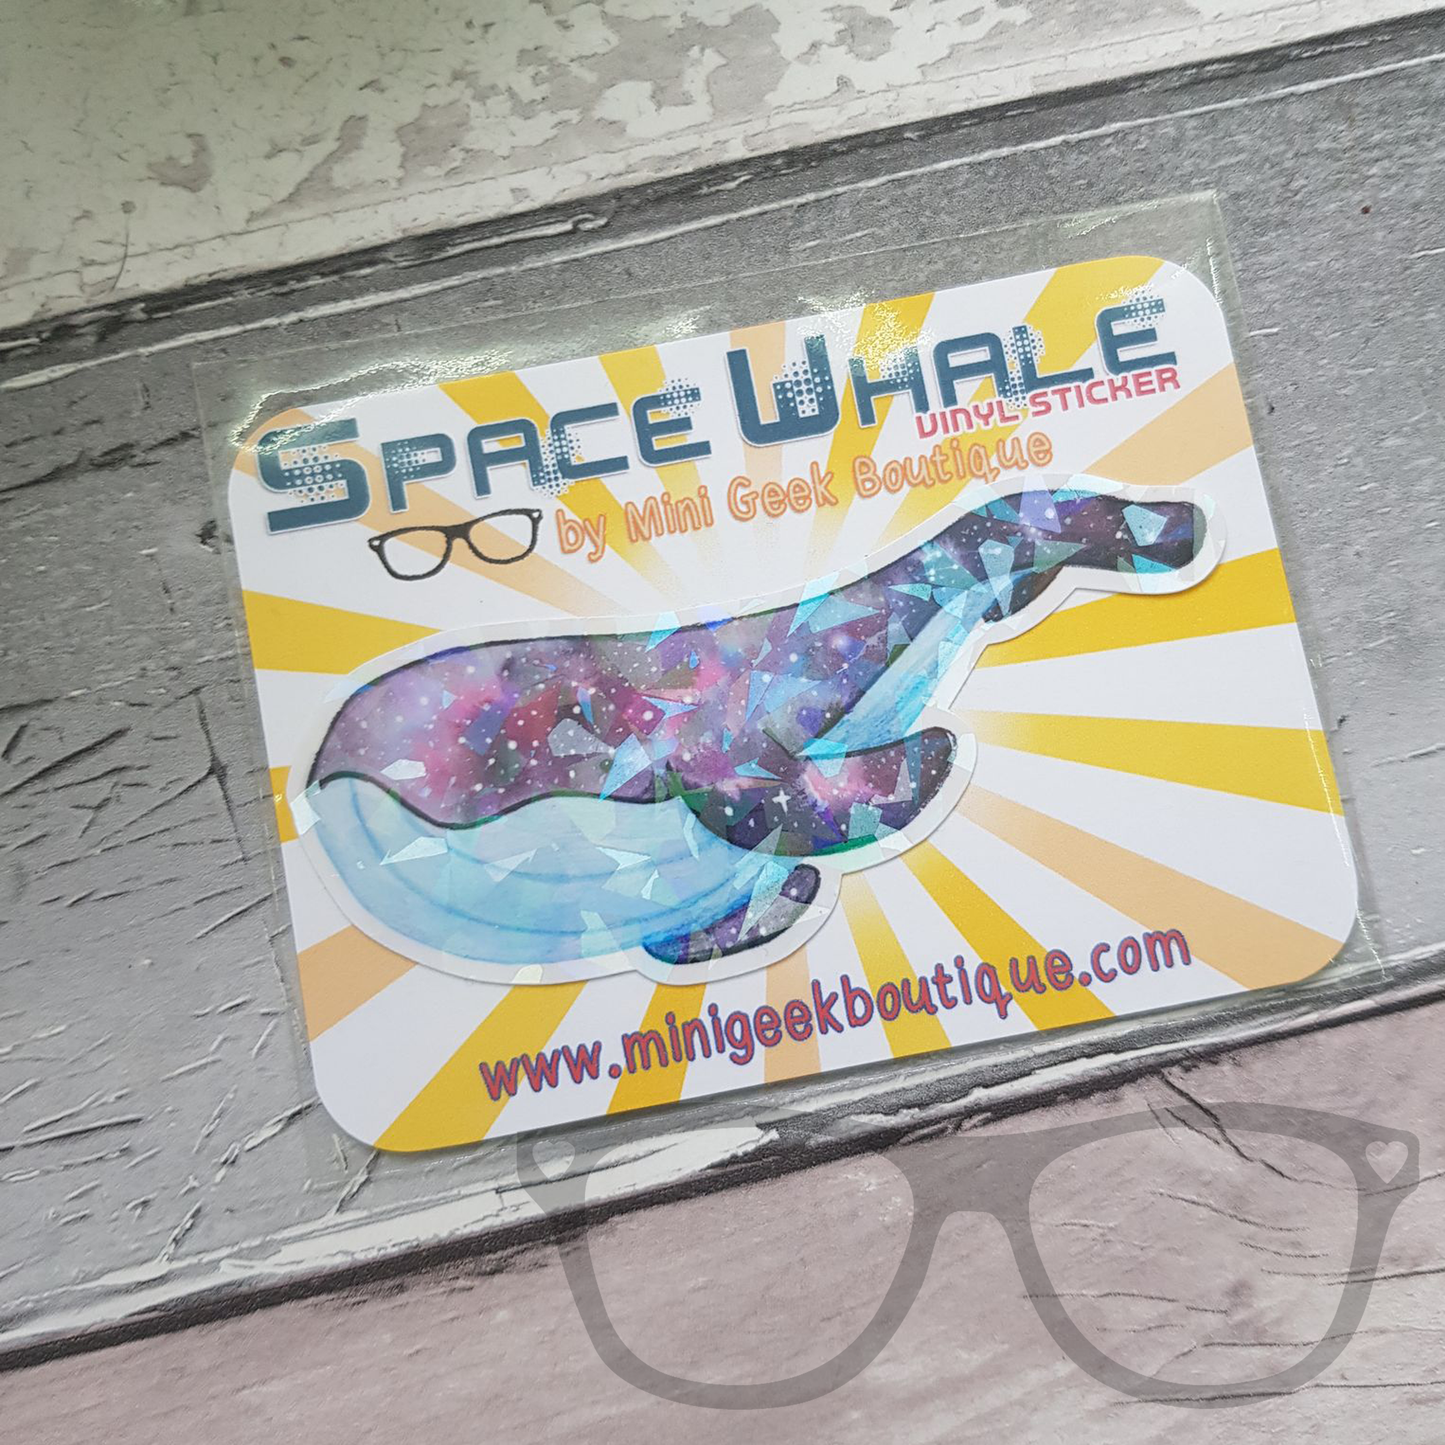 Sparkly space whale vinyl sticker in eco friendly packaging